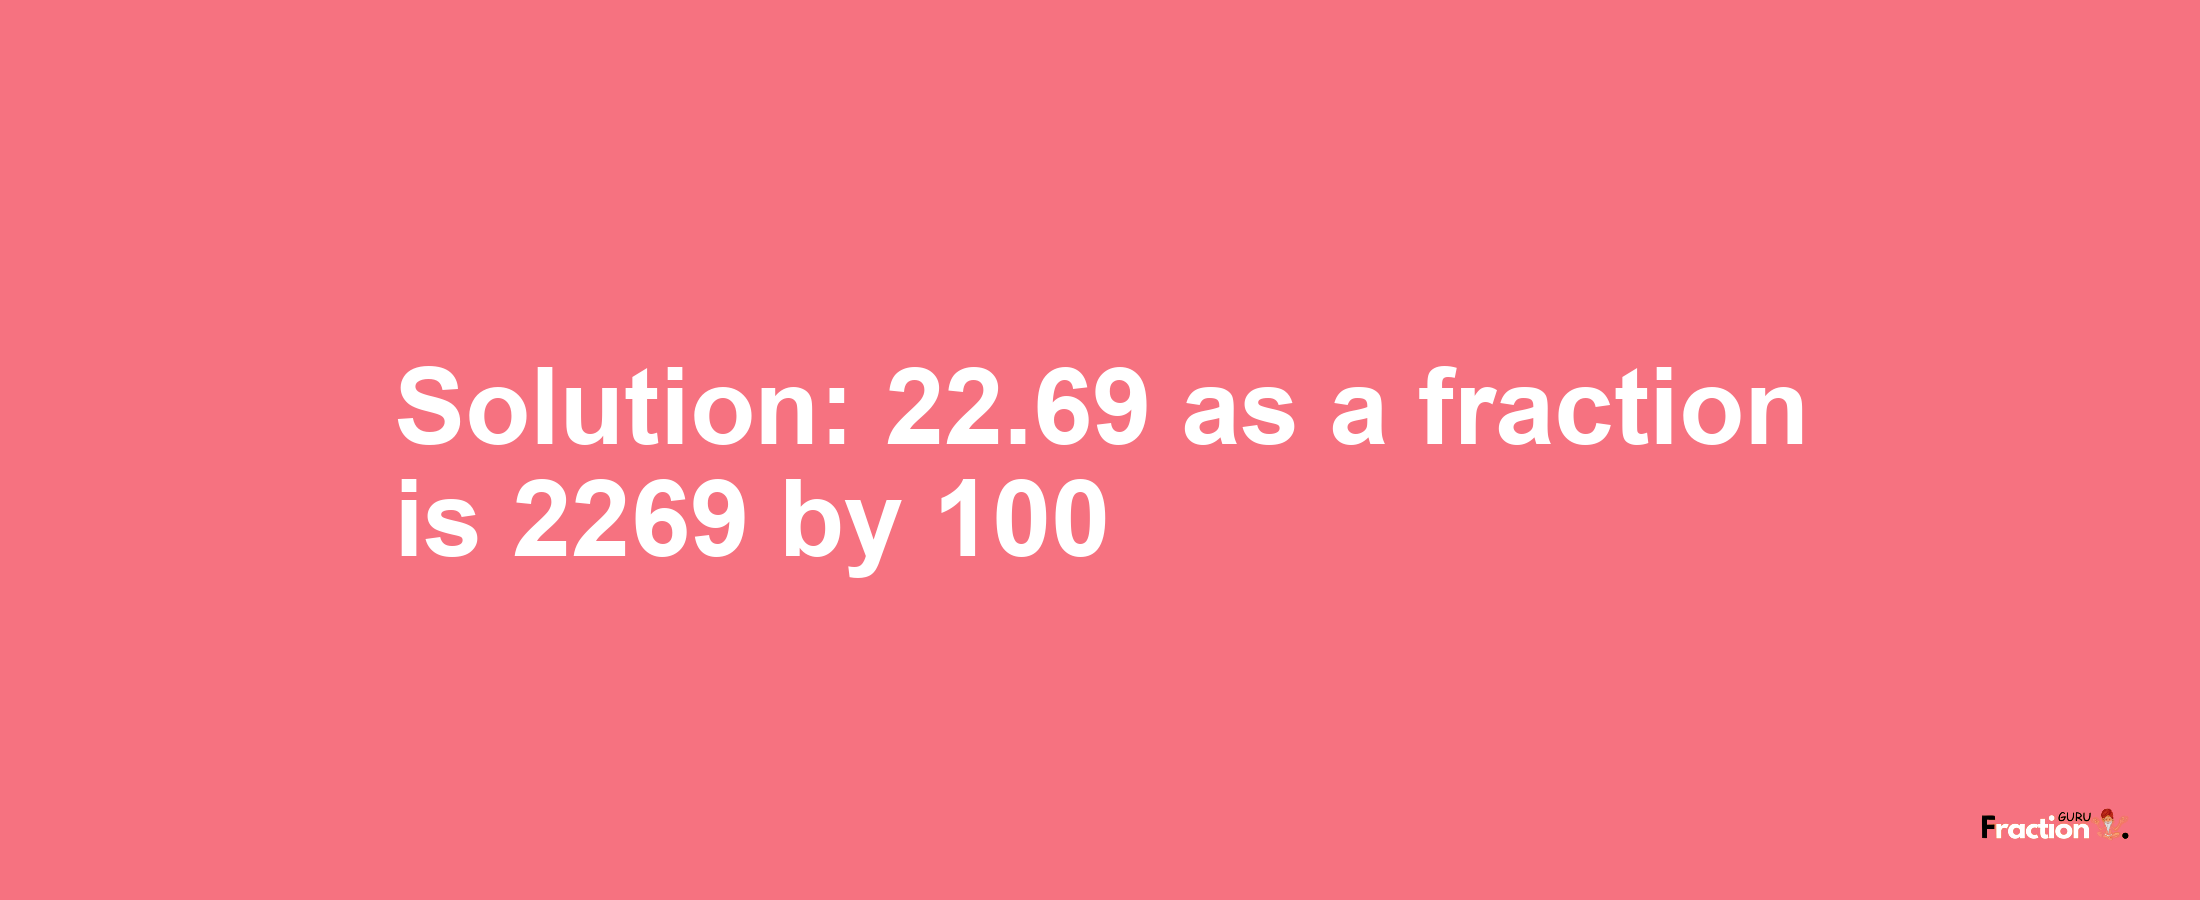 Solution:22.69 as a fraction is 2269/100